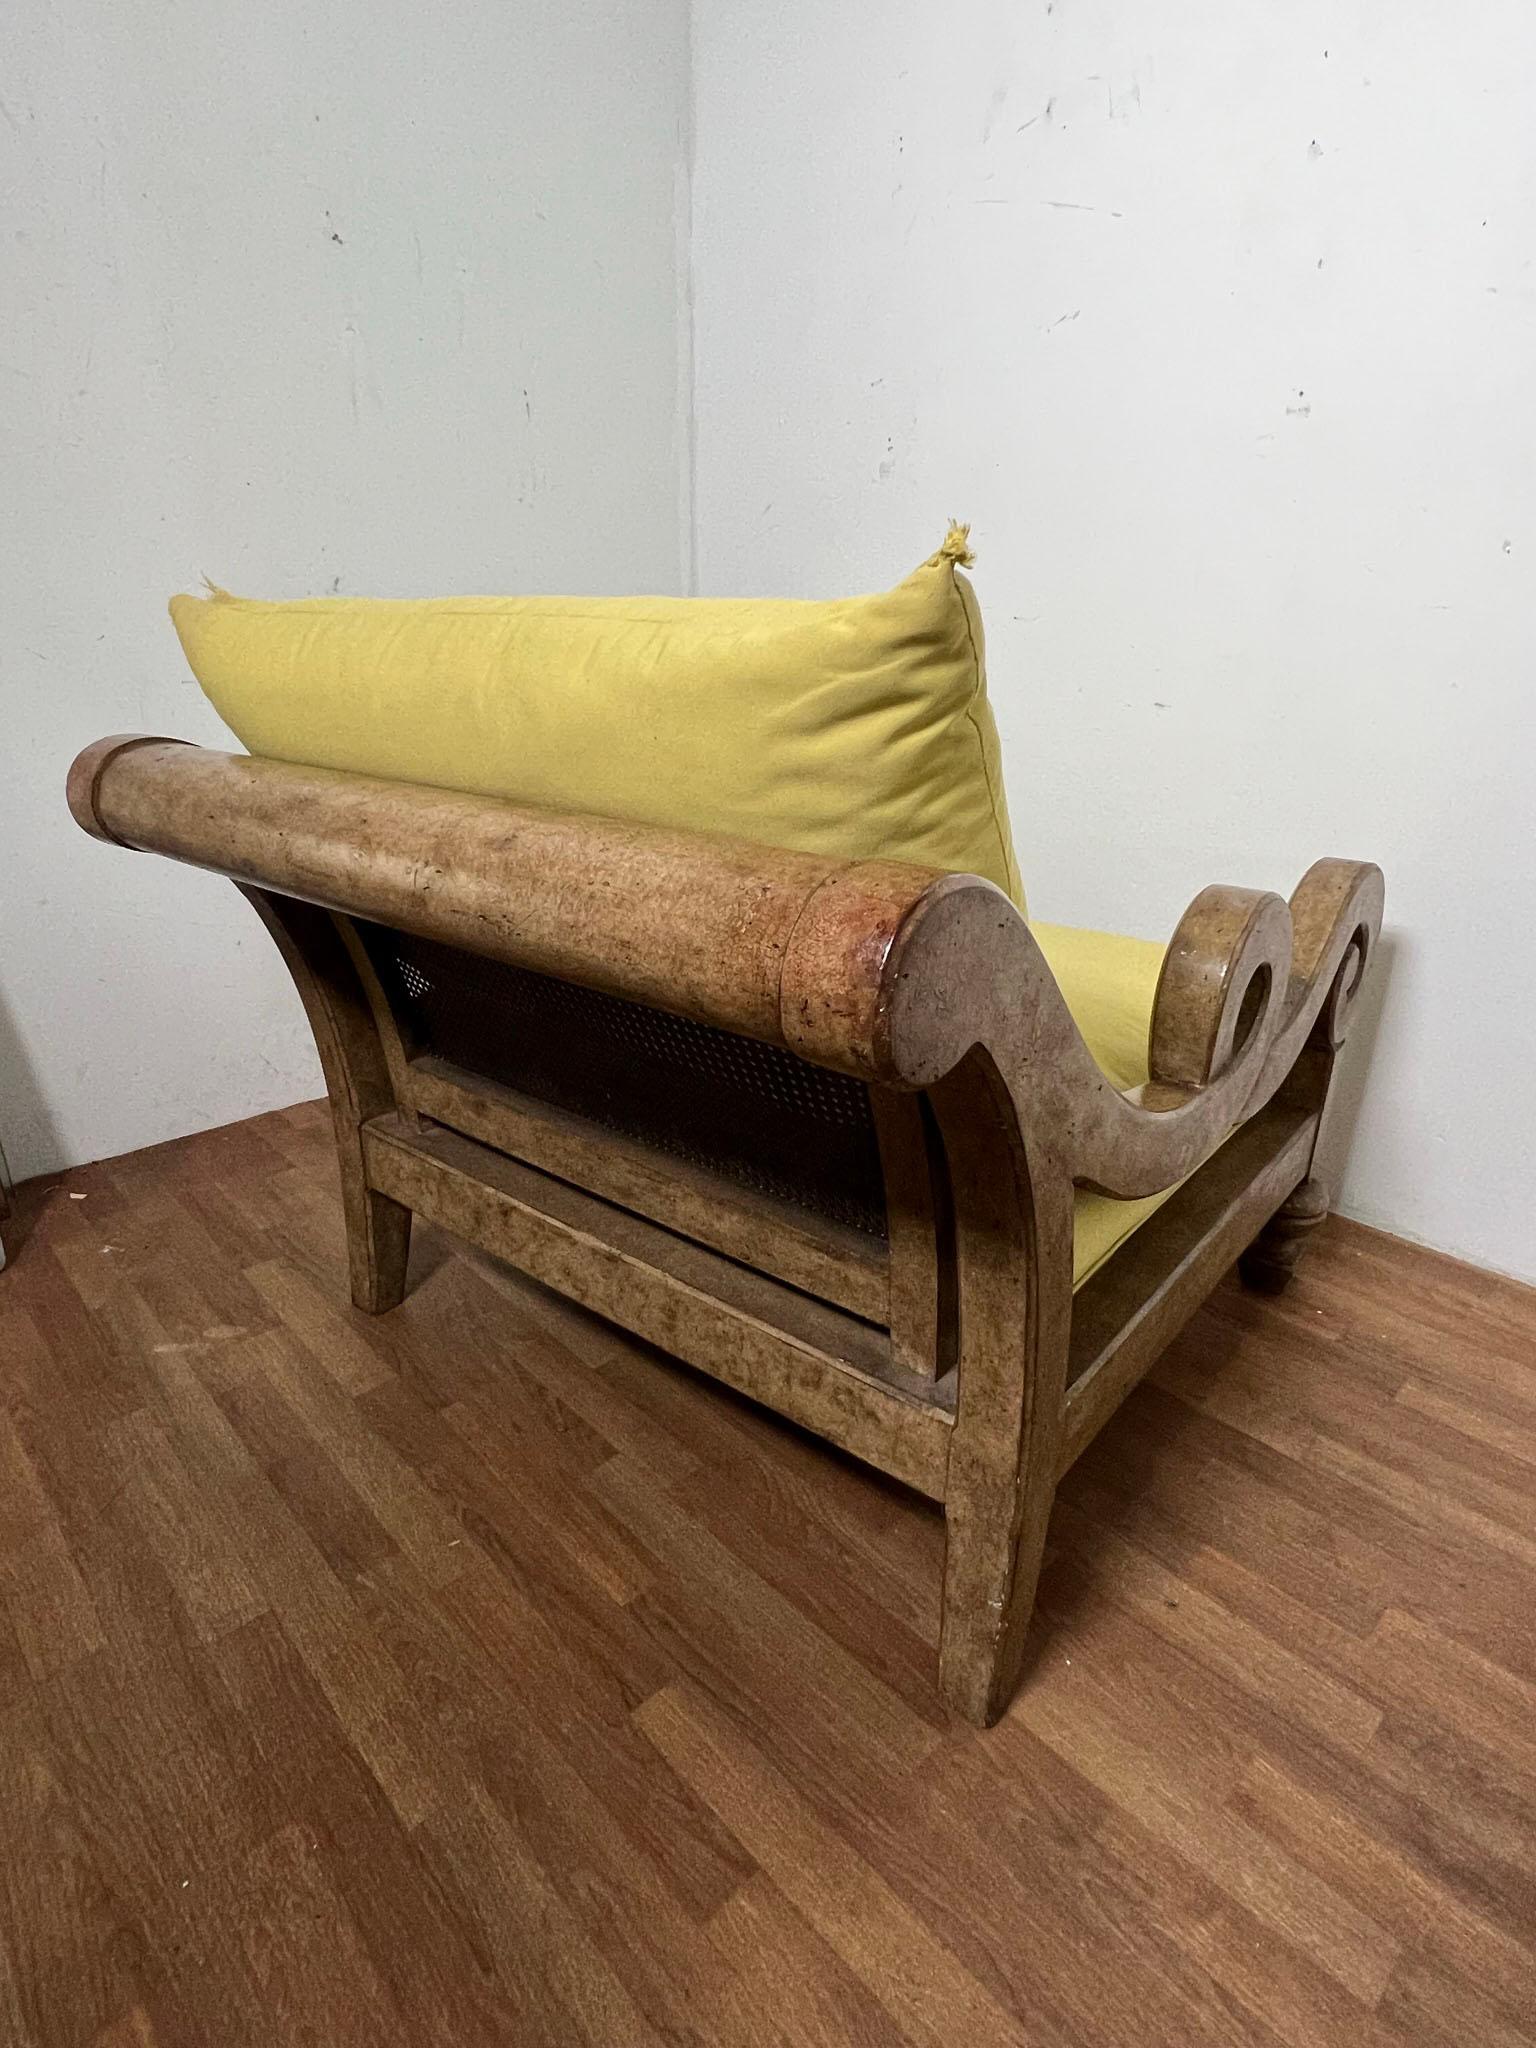 Marge Carson Oversized Burl Wood and Cane Lounge With Ottoman Circa 1980s For Sale 1